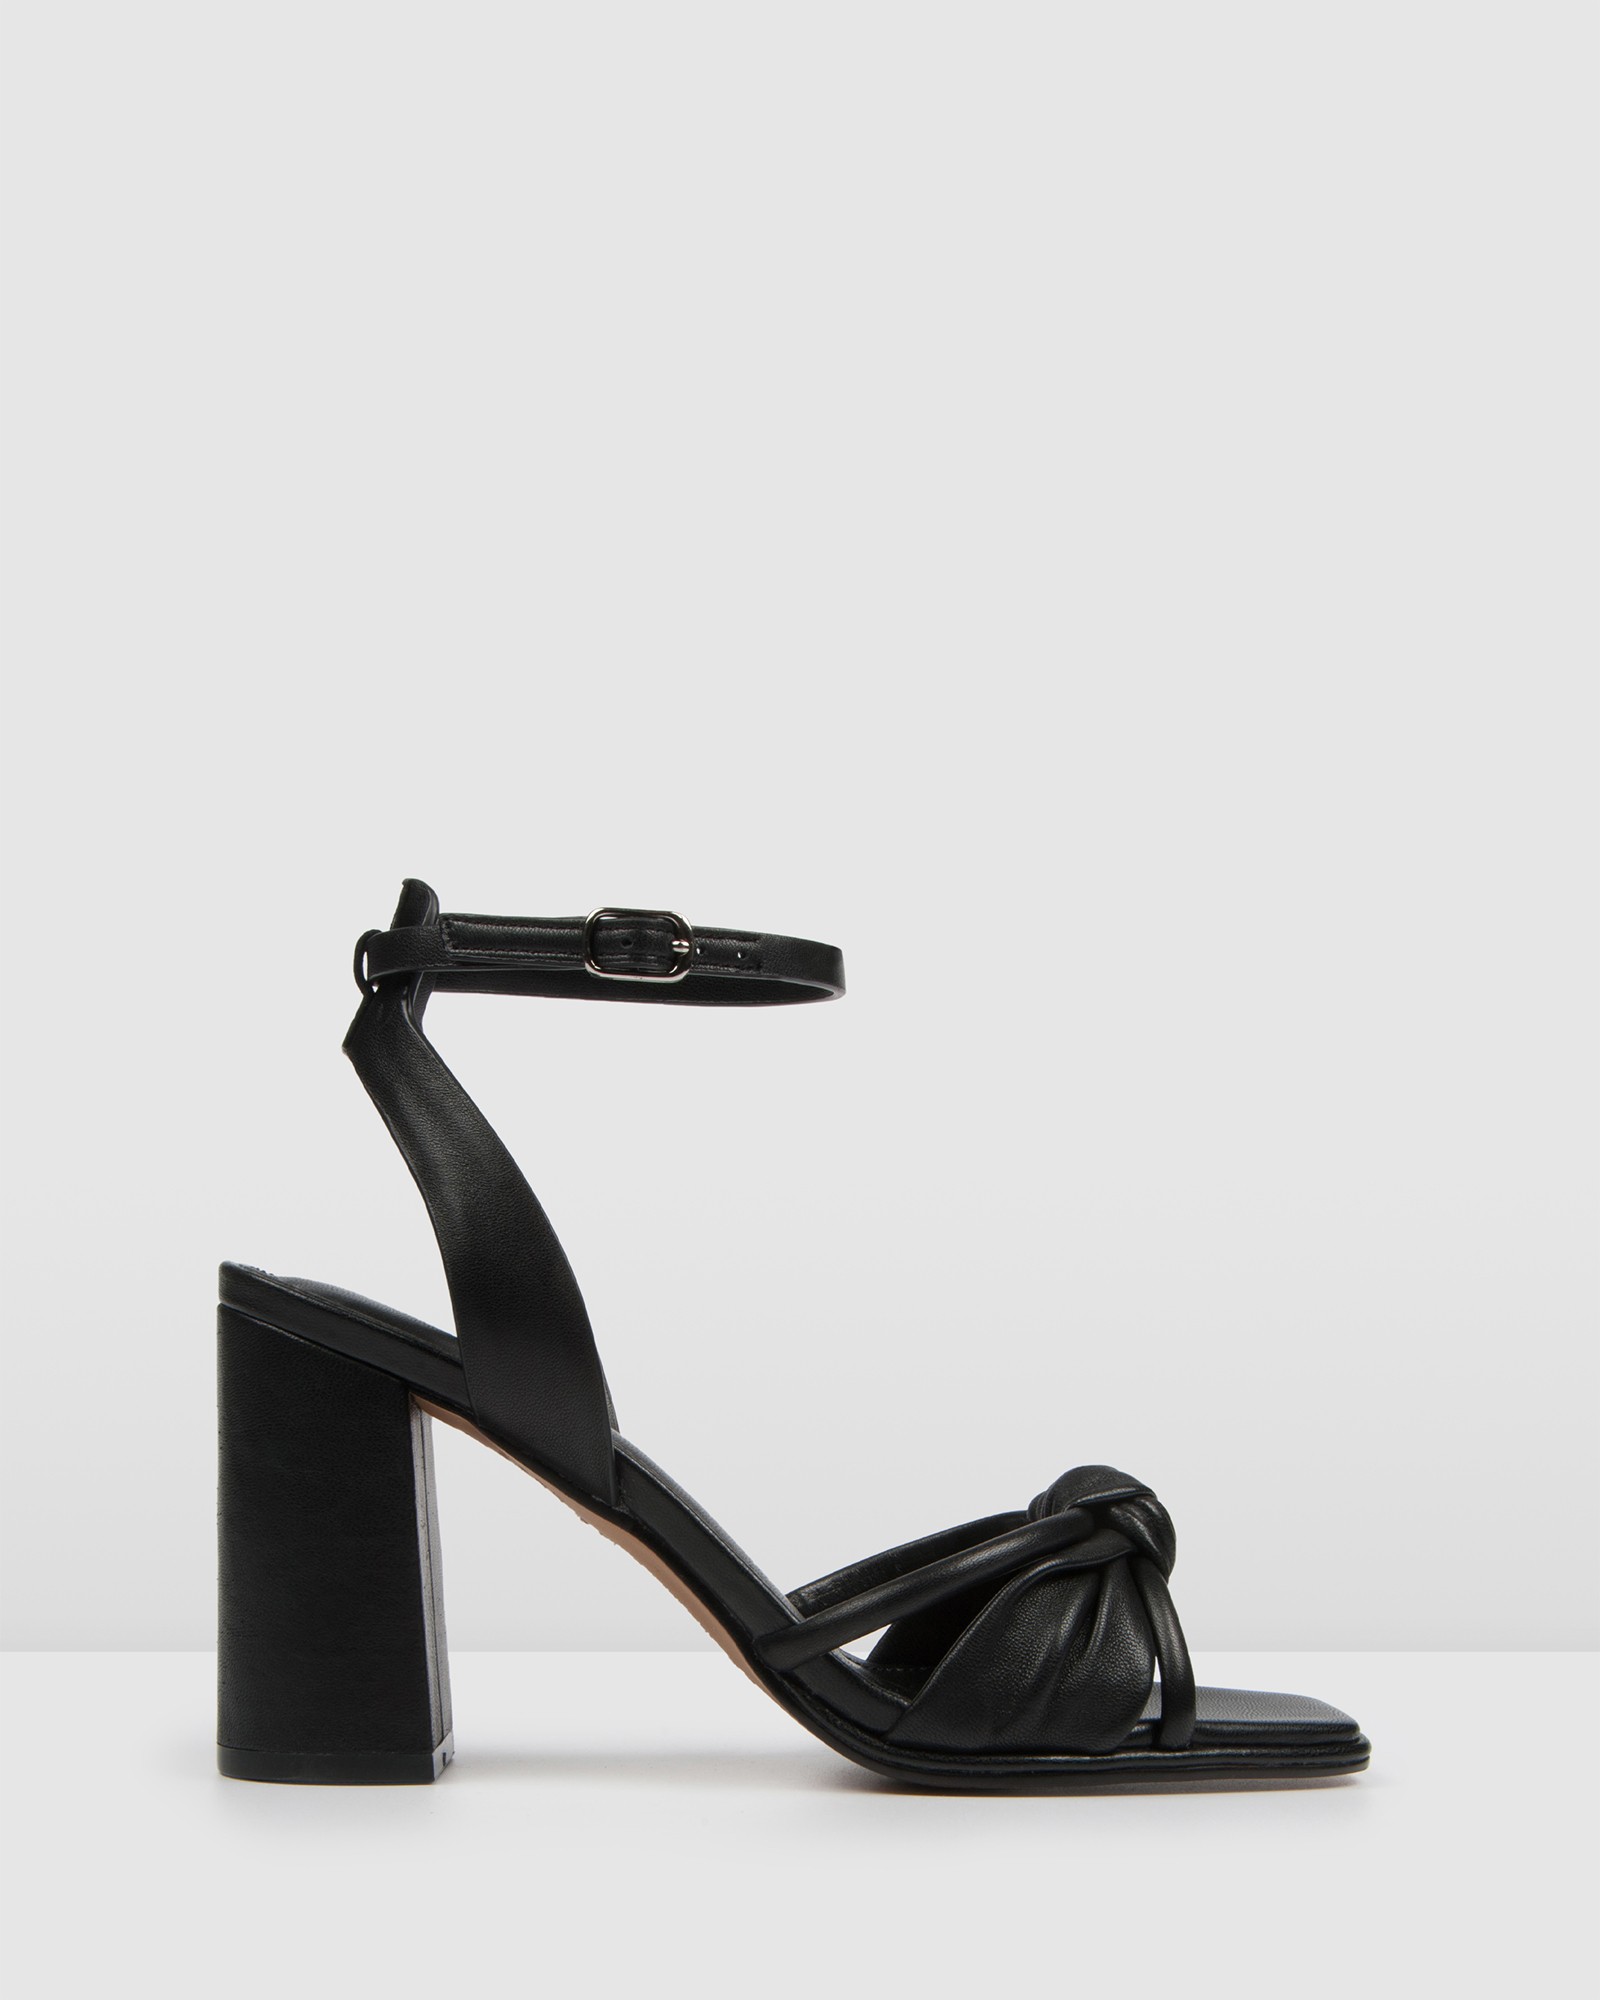 Adia High Sandals Black Leather by Jo Mercer | ShoeSales